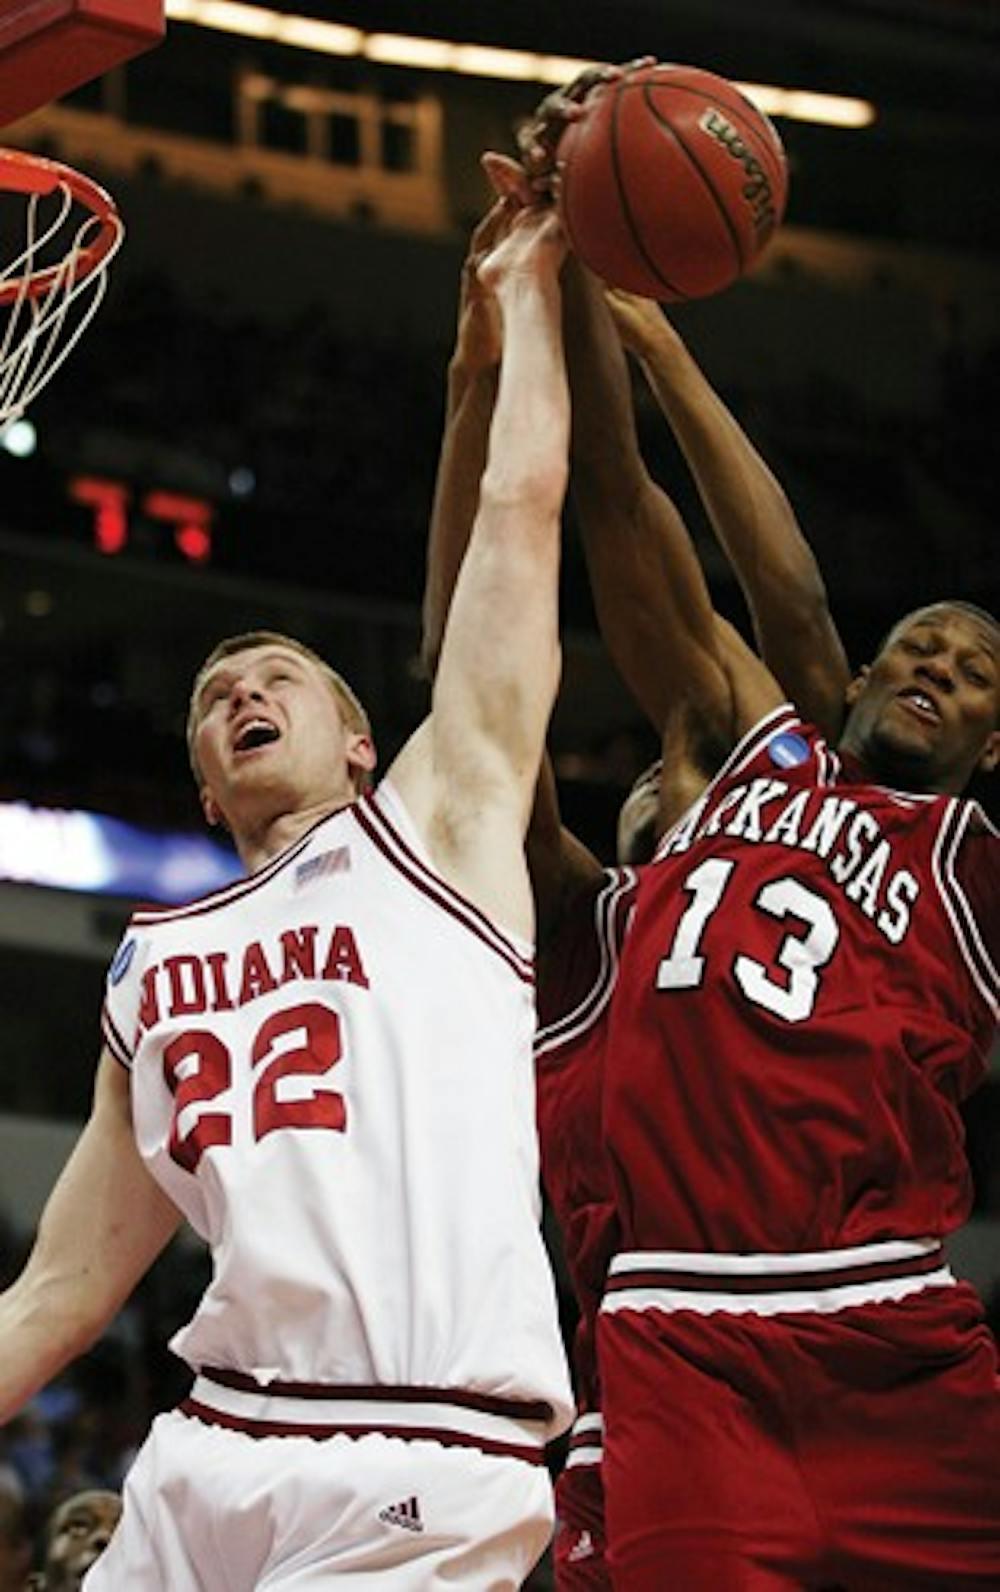 Jacob Kriese IDS
IU senior forward Lance Stemler competes for a rebound against Arkansas' Sonny Weems during the first round of the NCAA tournament Friday night in Raleigh, NC.  Weems led the Razorbacks with 31 points in the 86-72 victory over the Hoosiers.